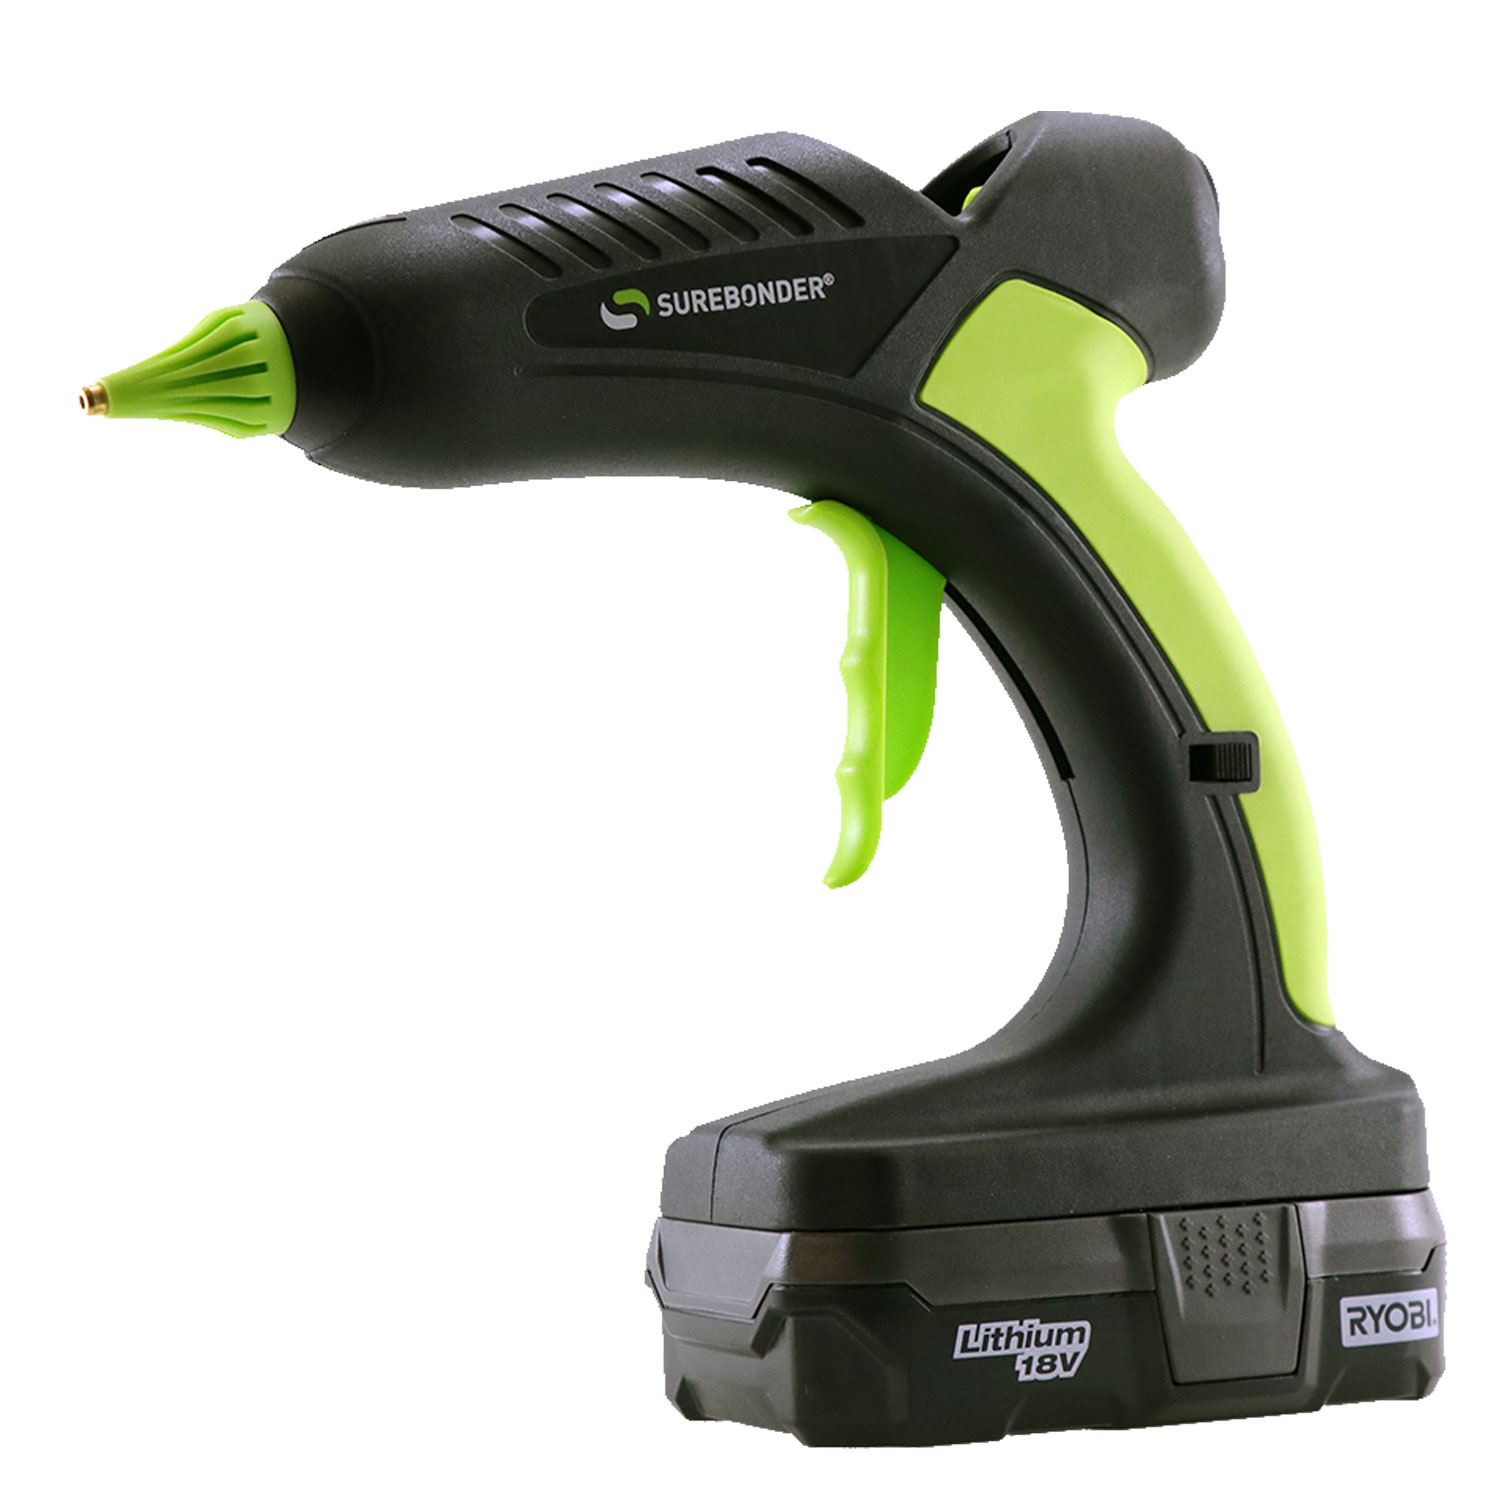 Ryobi ONE+ 18V Cordless Compact Glue Gun (Factory Blemished, Tool Only)